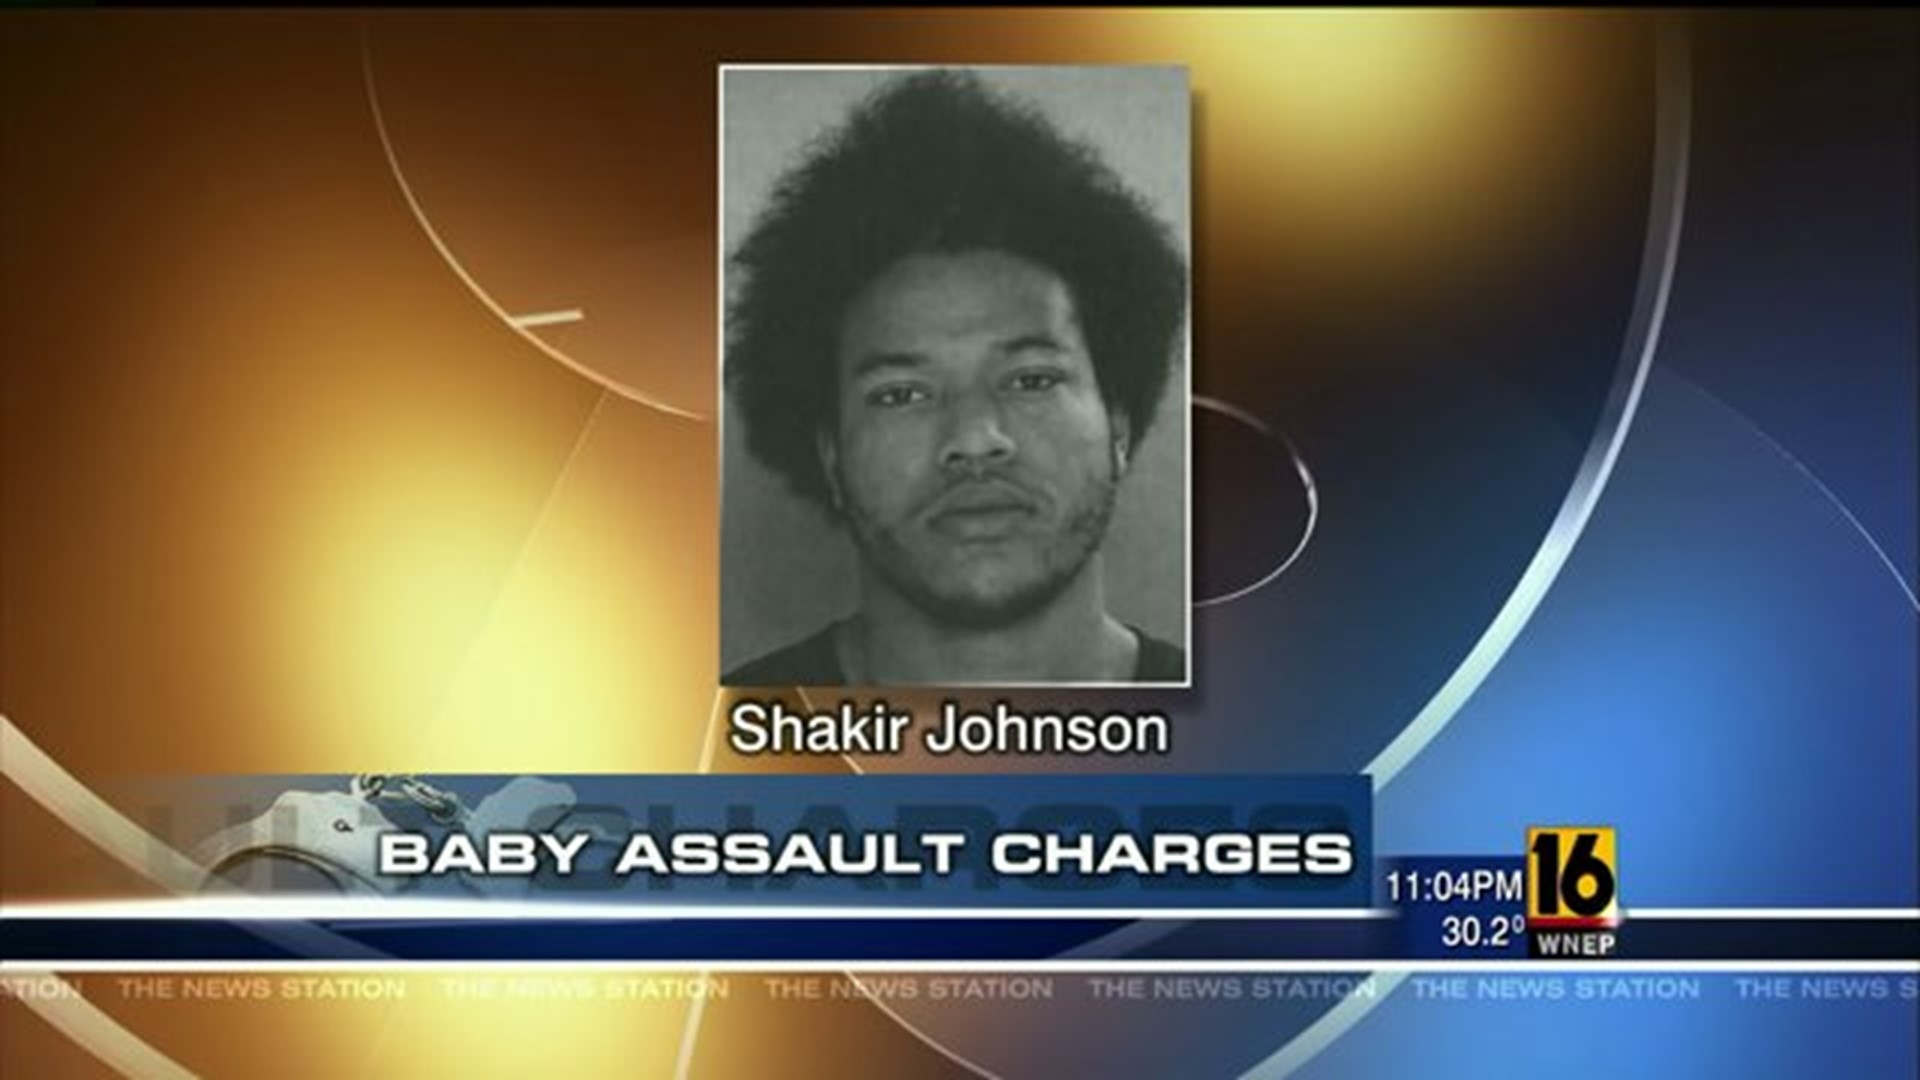 Man Held On $200K, Charged With Assaulting Infant